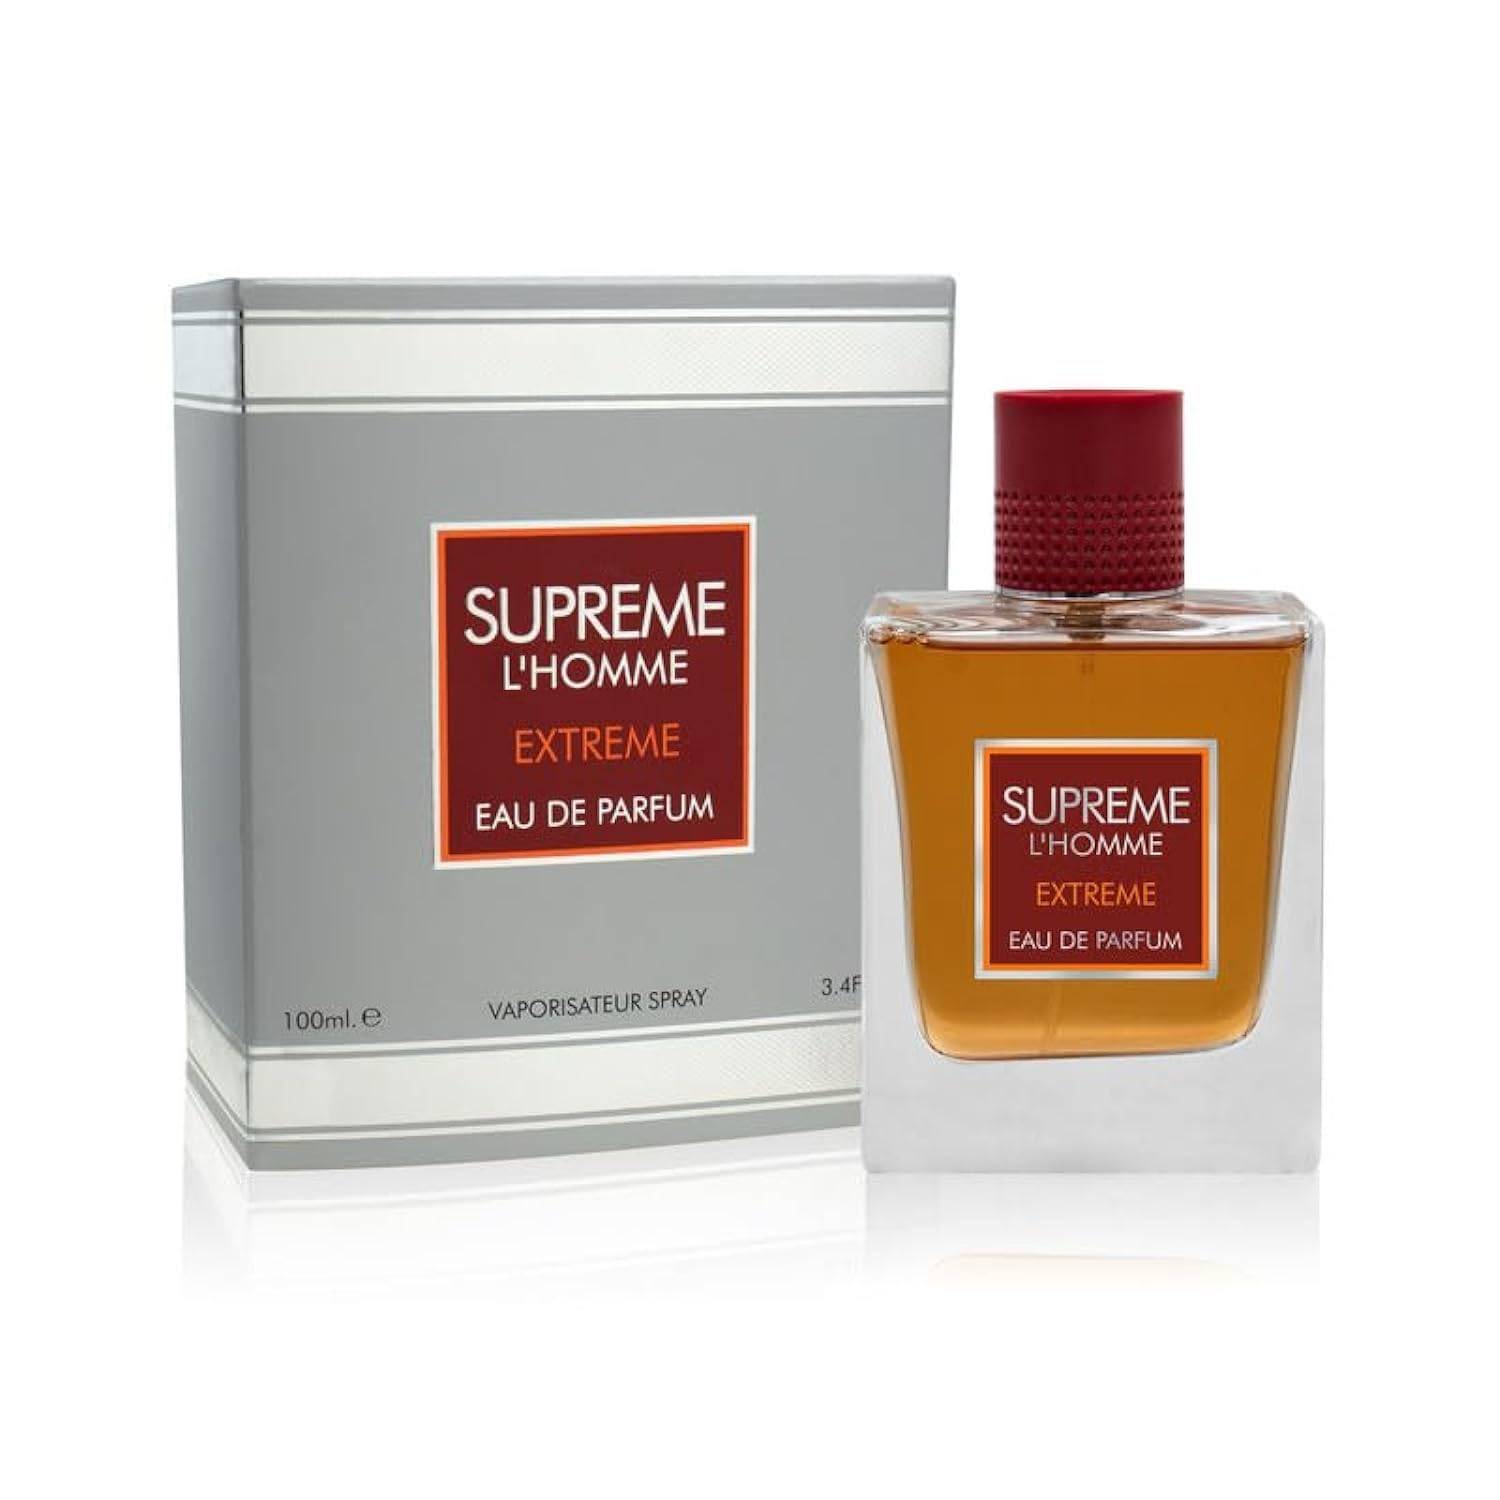 Supreme L'homme Extreme Edp 100ml by Fragrance World “GUERLAIN L'HOMME  IDEAL EXTREME” CLONE – Best Brands Perfume